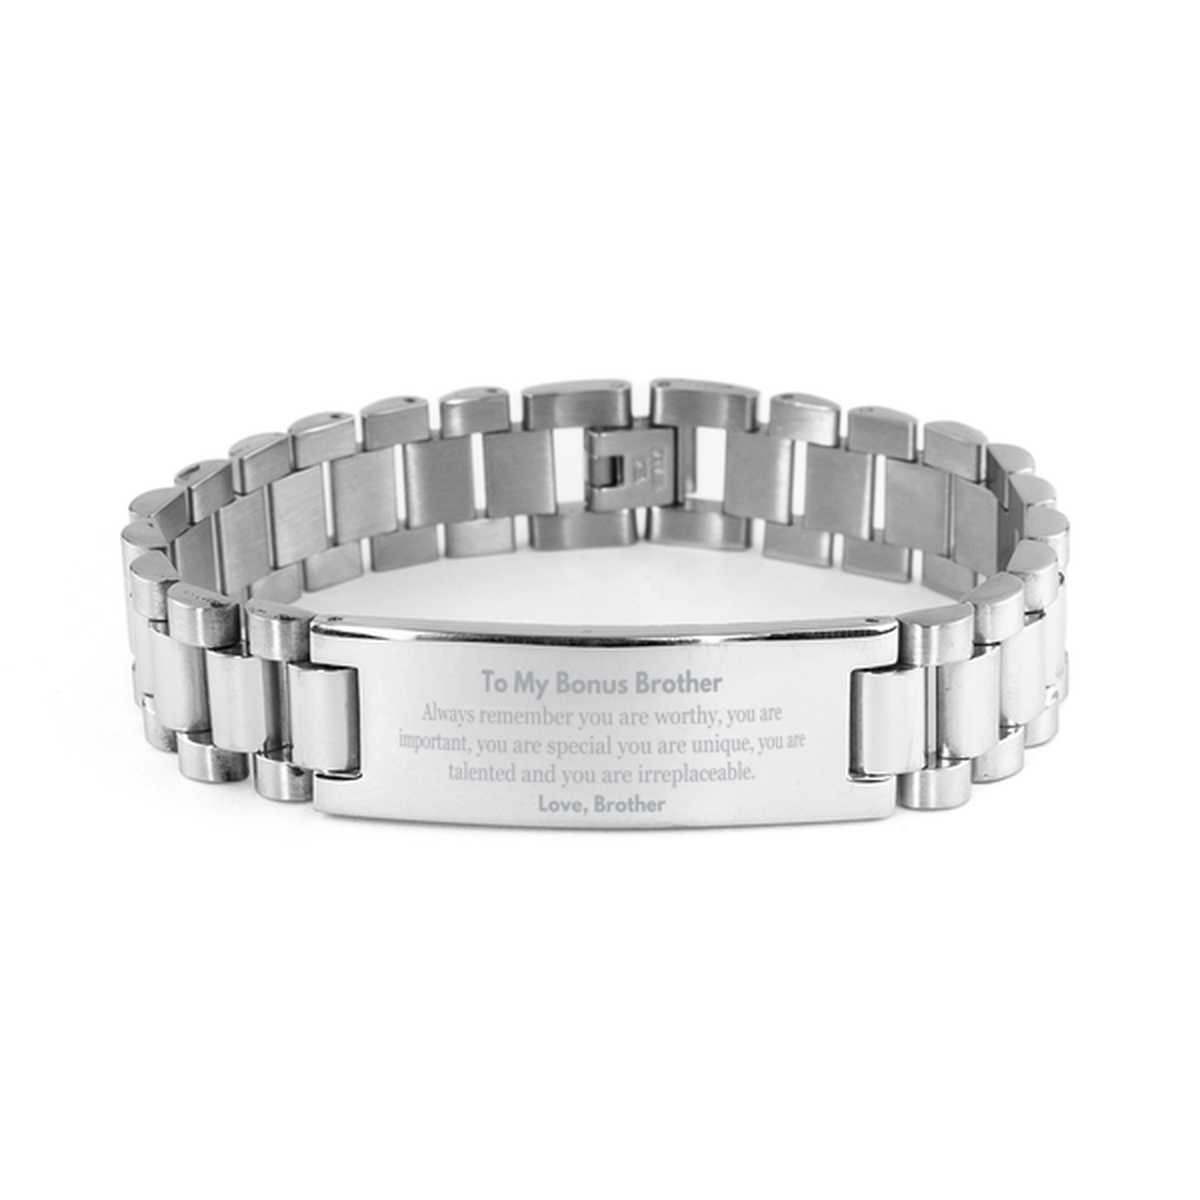 Bonus Brother Birthday Gifts from Brother, Inspirational Ladder Stainless Steel Bracelet for Bonus Brother Christmas Graduation Gifts for Bonus Brother Always remember you are worthy, you are important. Love, Brother